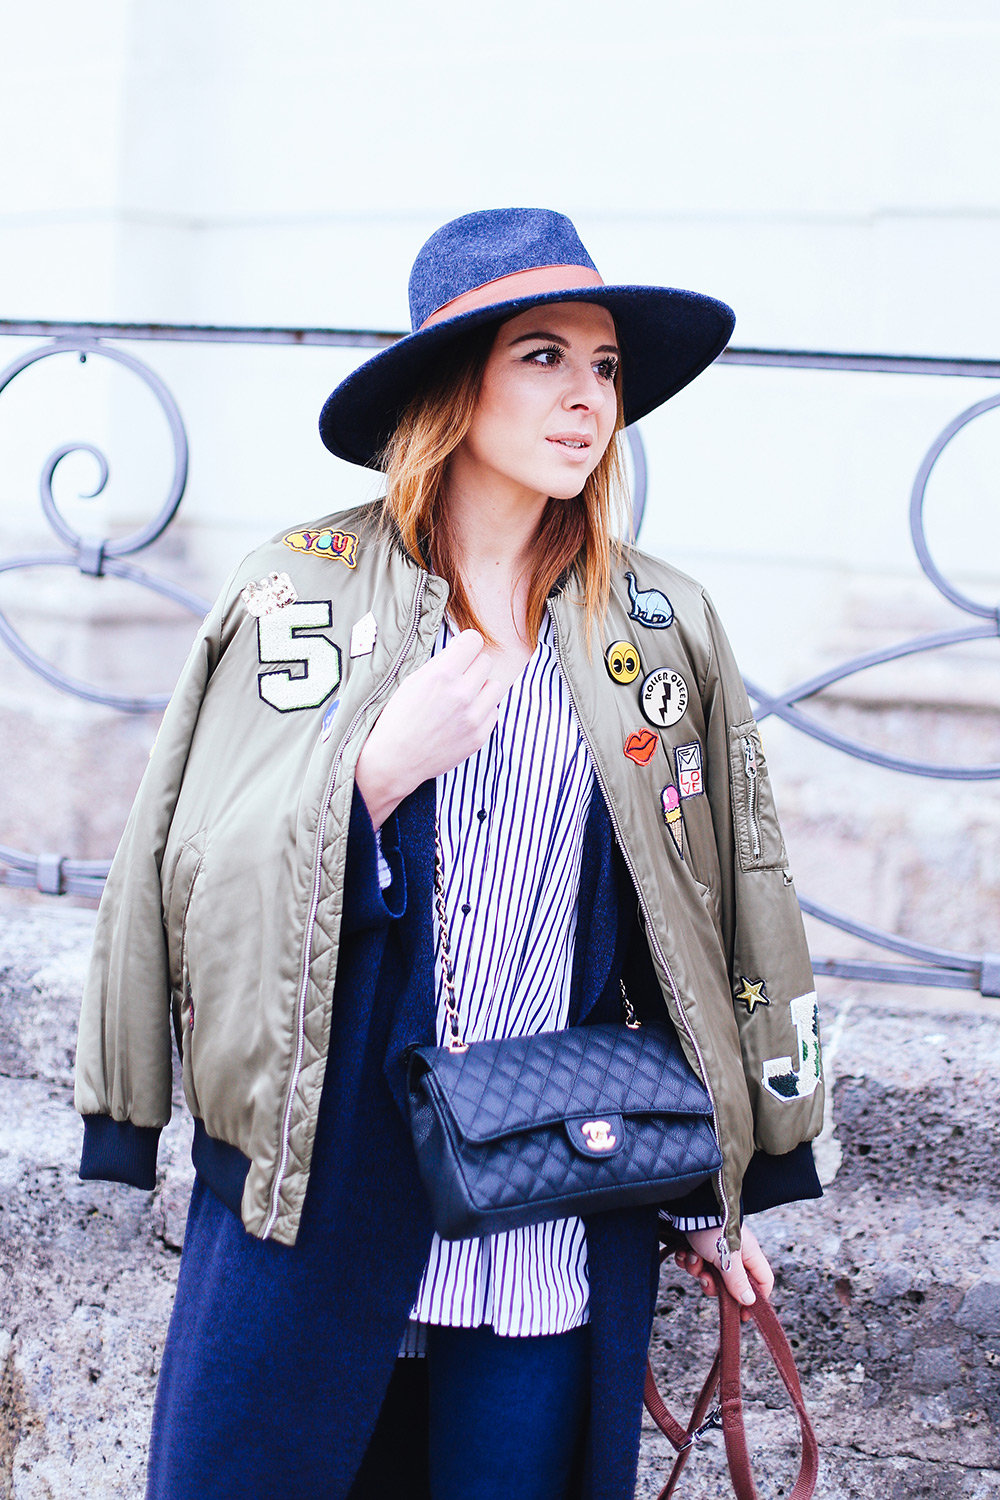 Bomberjacke kombinieren, Bomberjacke mit Patches, layering outfit, lagenlook, streetstyle innsbruck, frenchie, chanel flap bag, whoismocca.com, fashionblogger